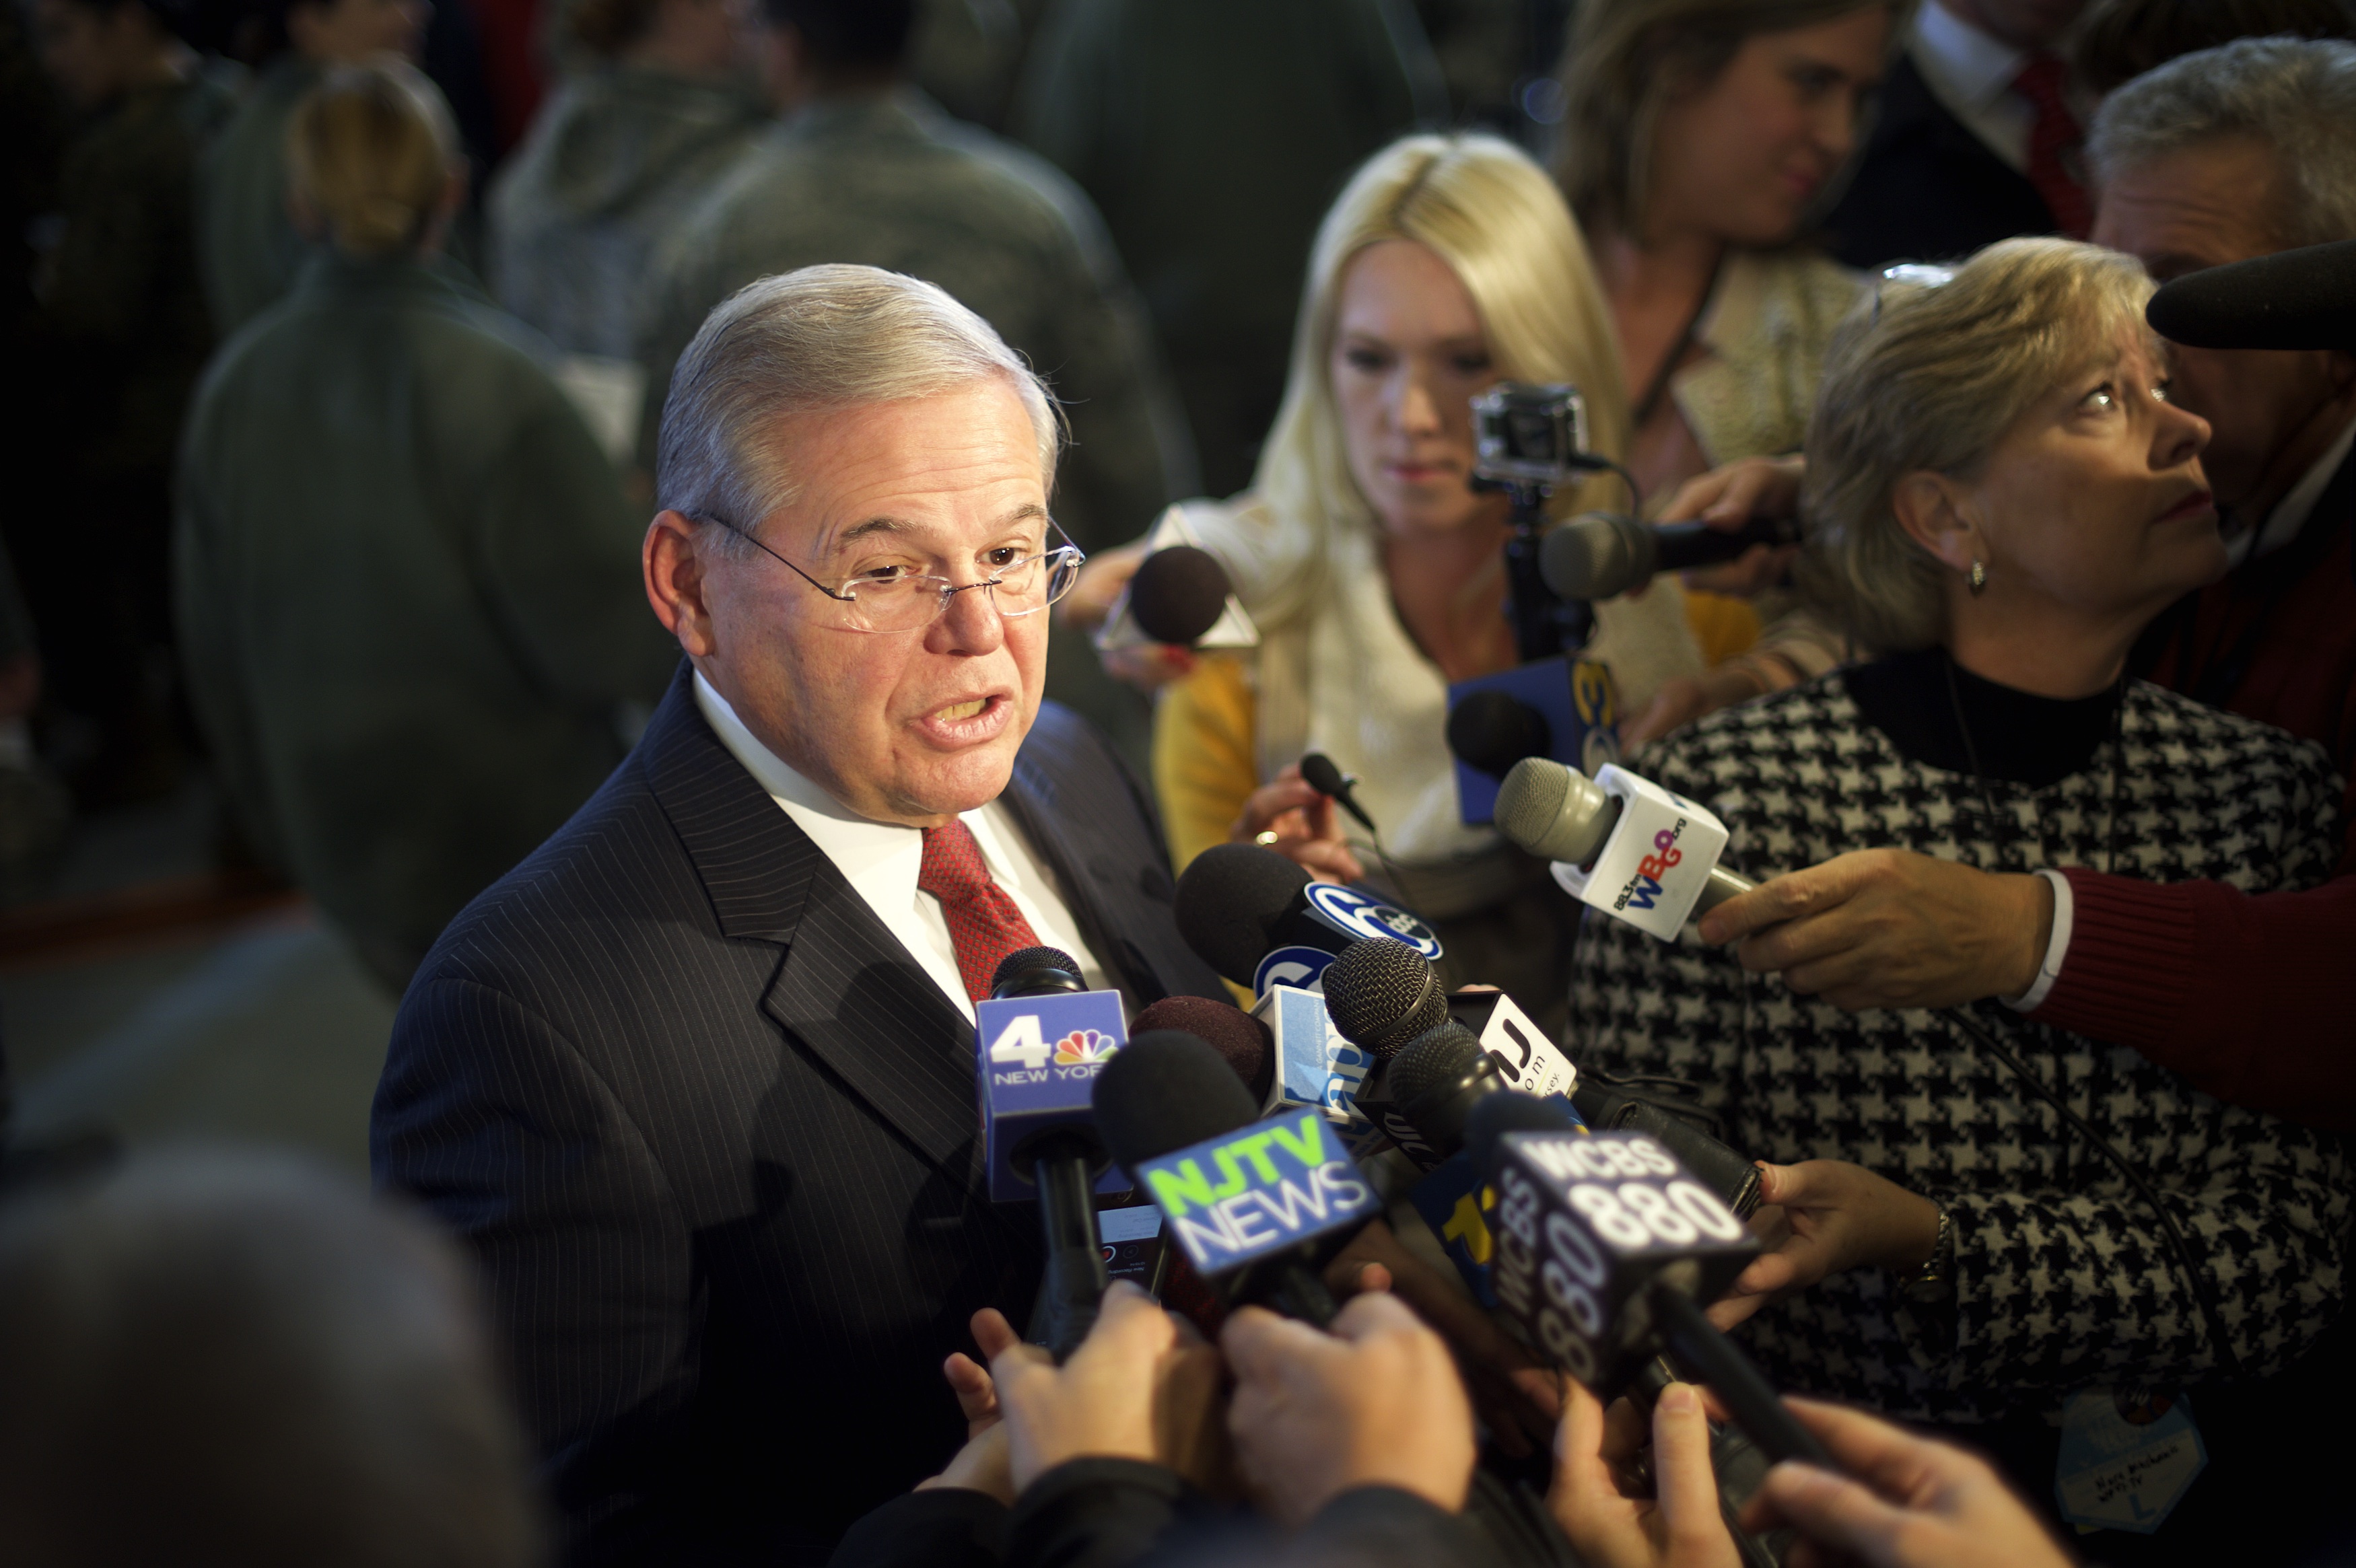  U.S. S Robert Menendez addresses the media in advance of an event with U.S. President Barack Obama December 15, 2014 at Joint Base McGuire-Dix-Lakehurst, New Jersey. (Getty)